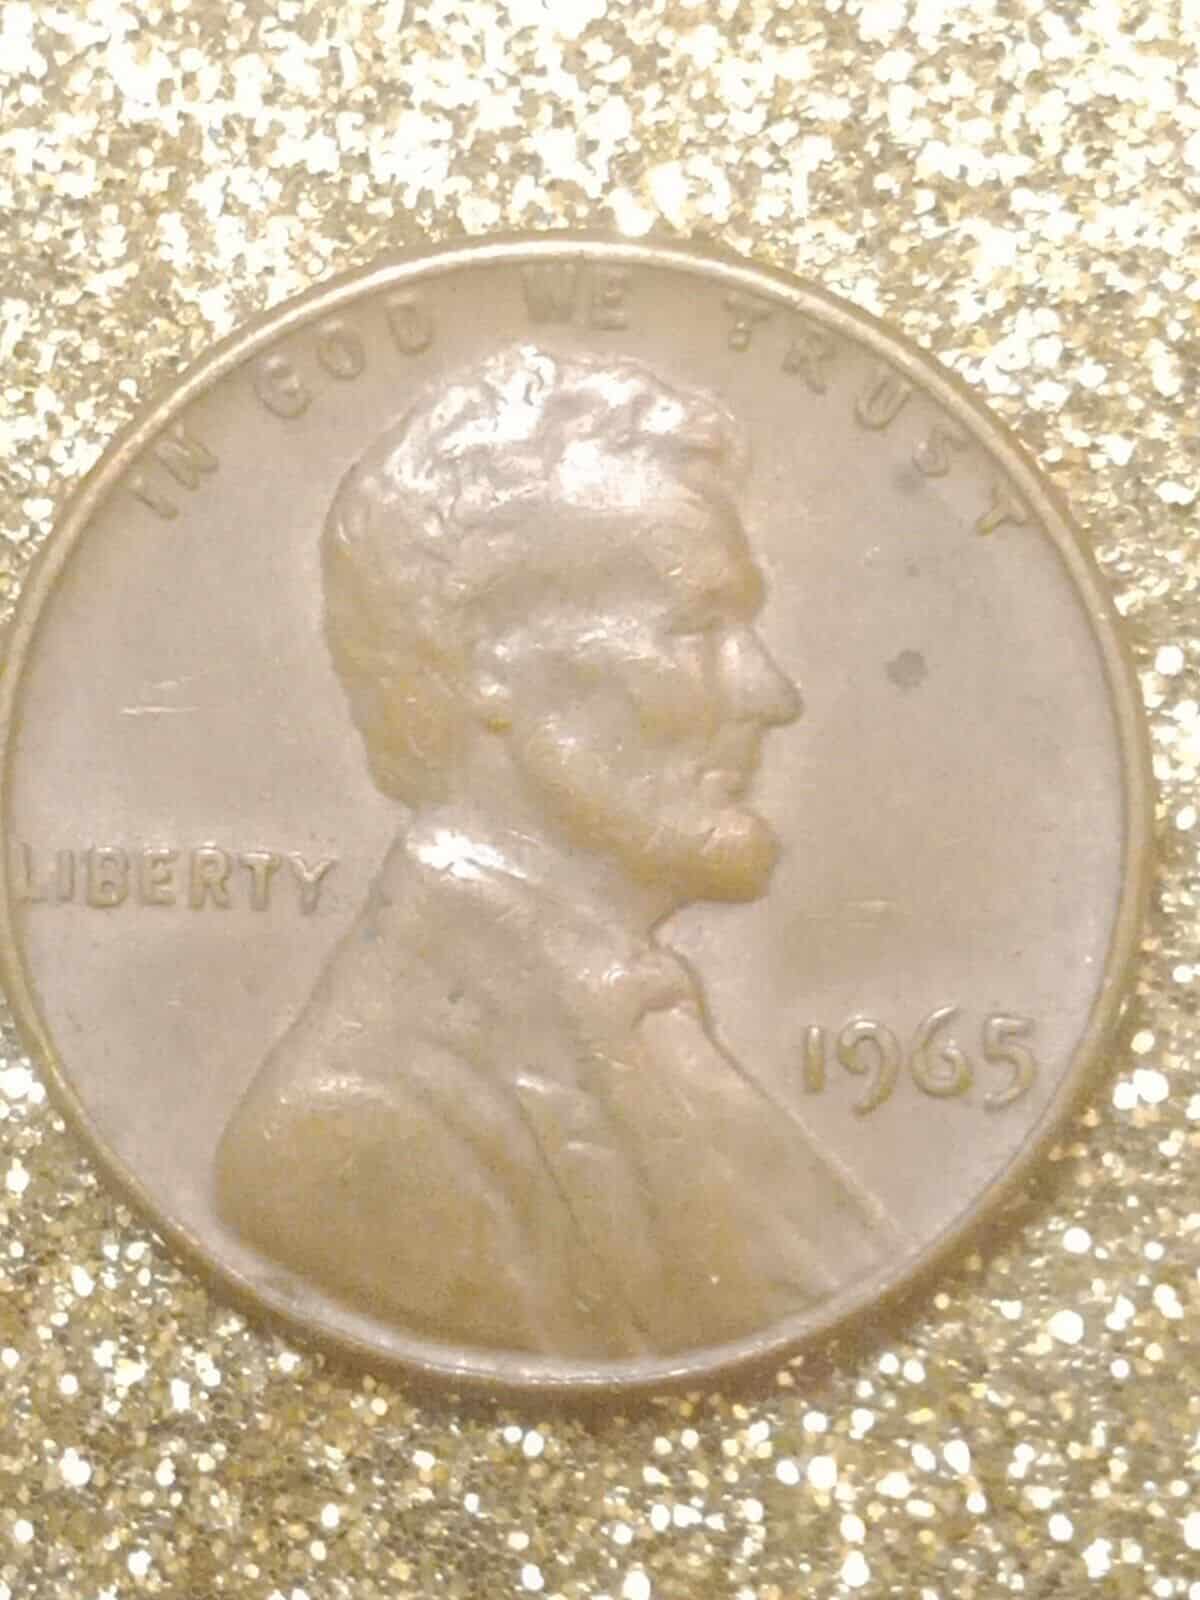 1965 Doubled Die Lincoln Penny Error